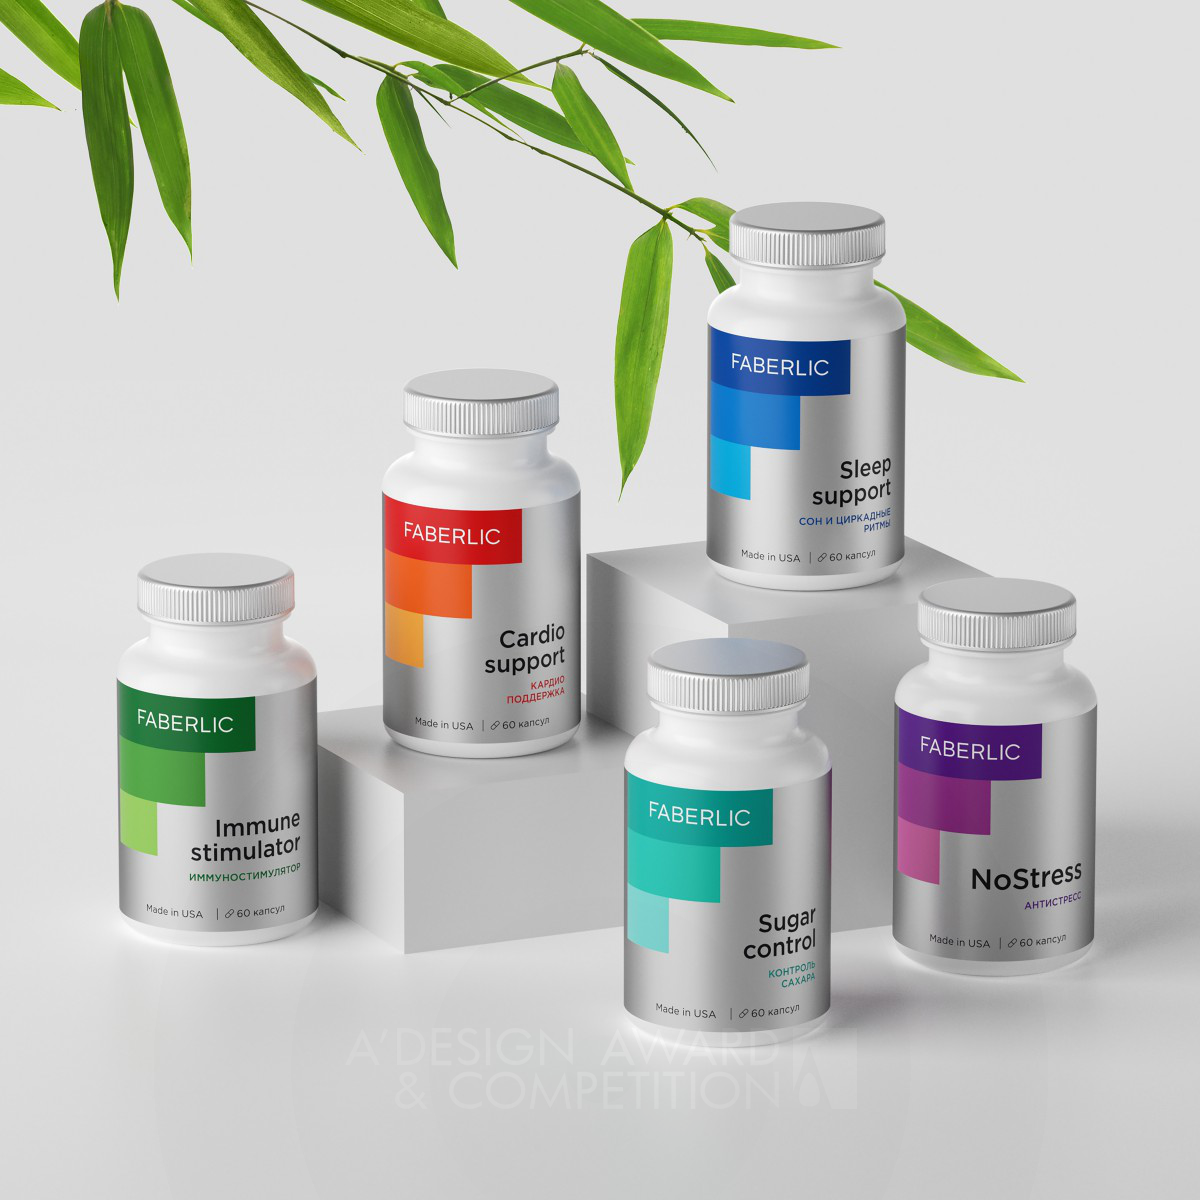 Faberlic Supplements <b>Packaging Concept